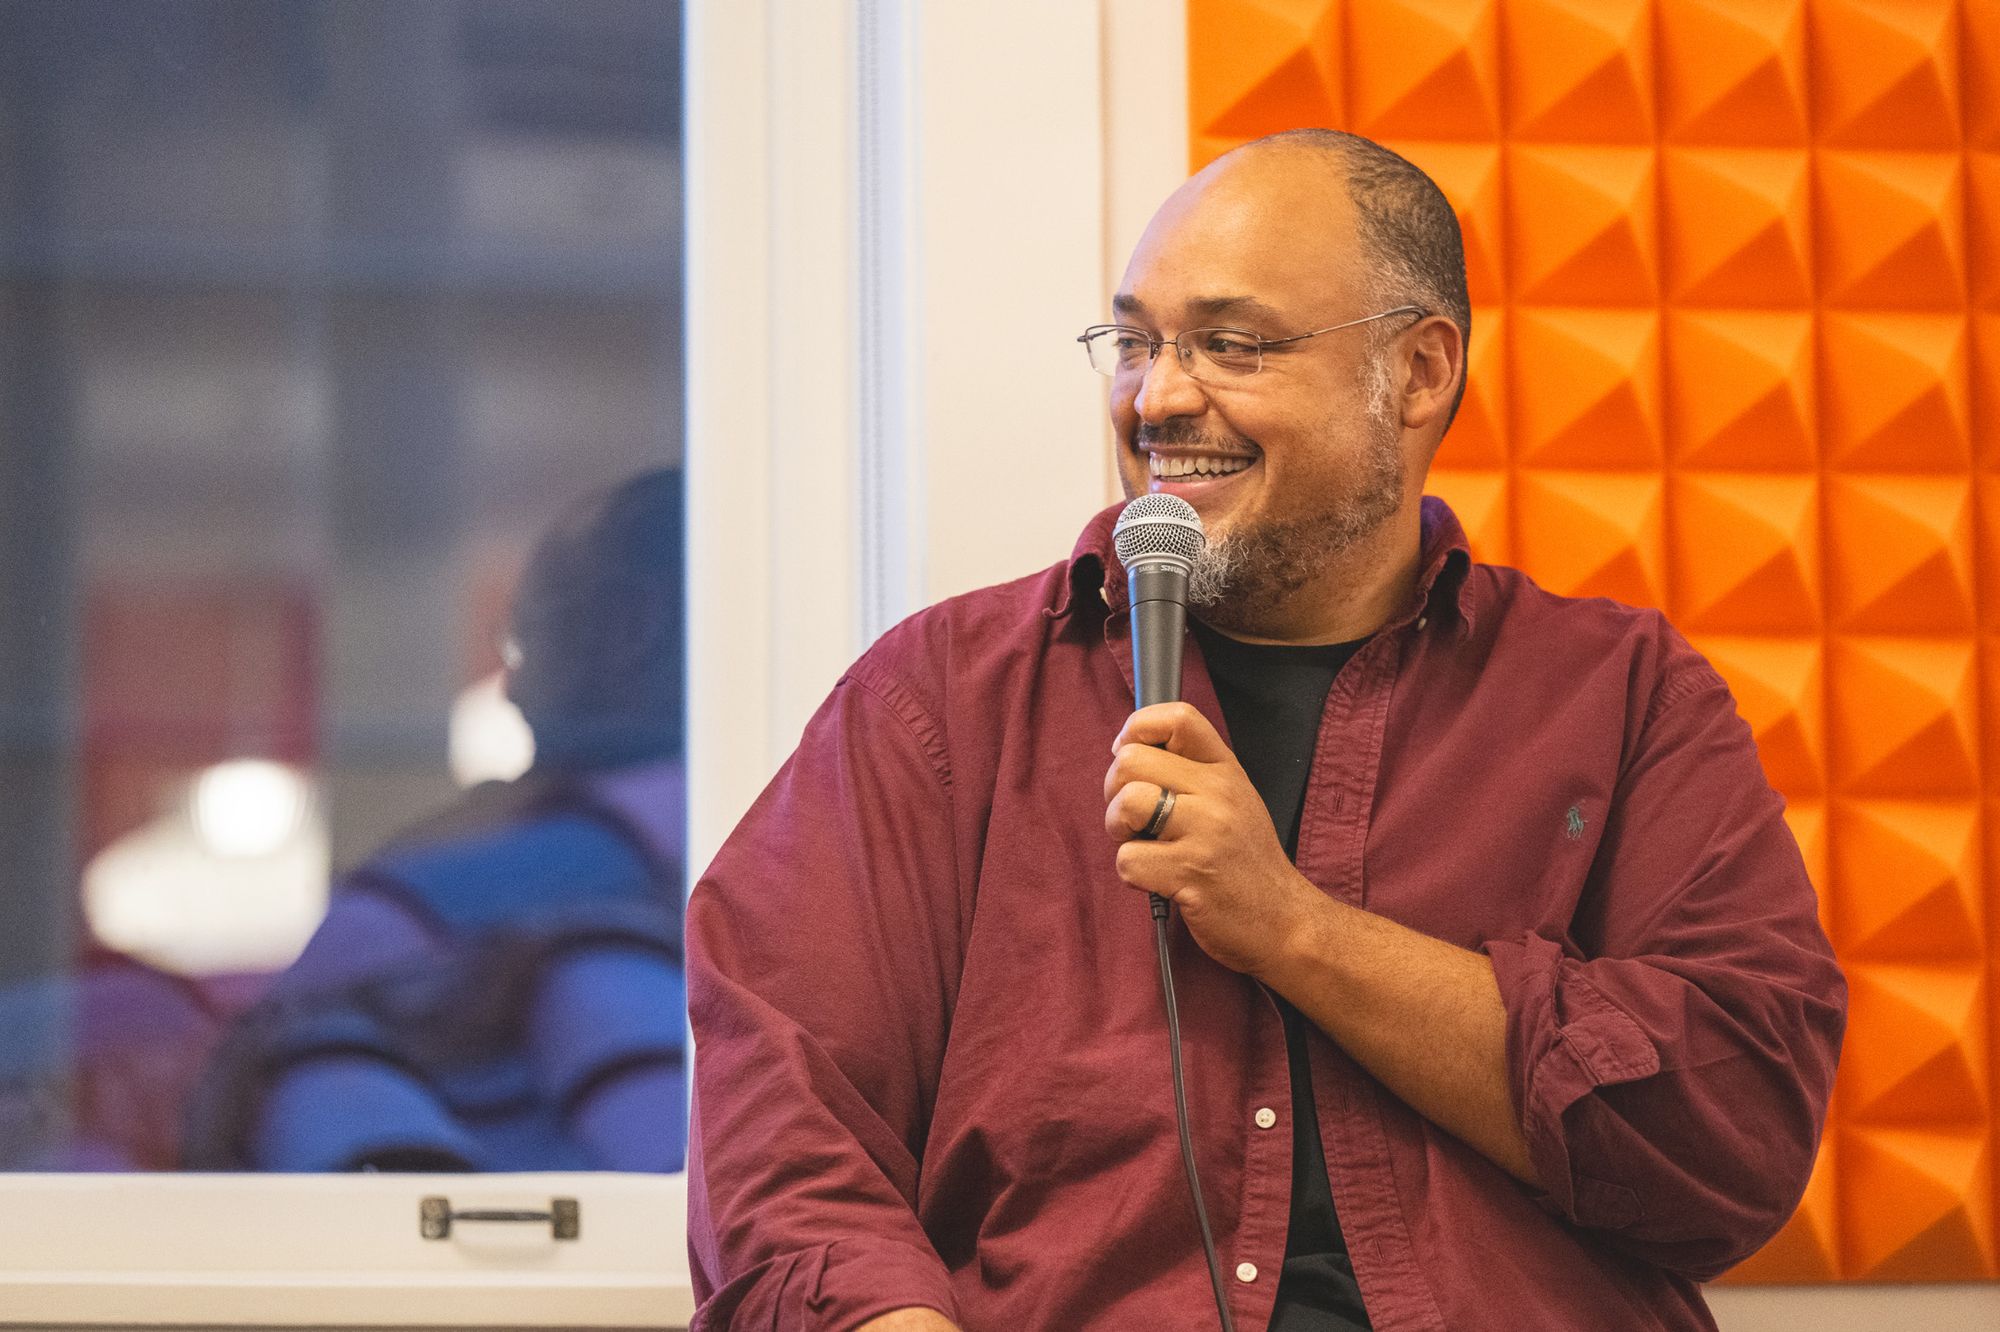 Y Combinator's Michael Seibel holding a microphone